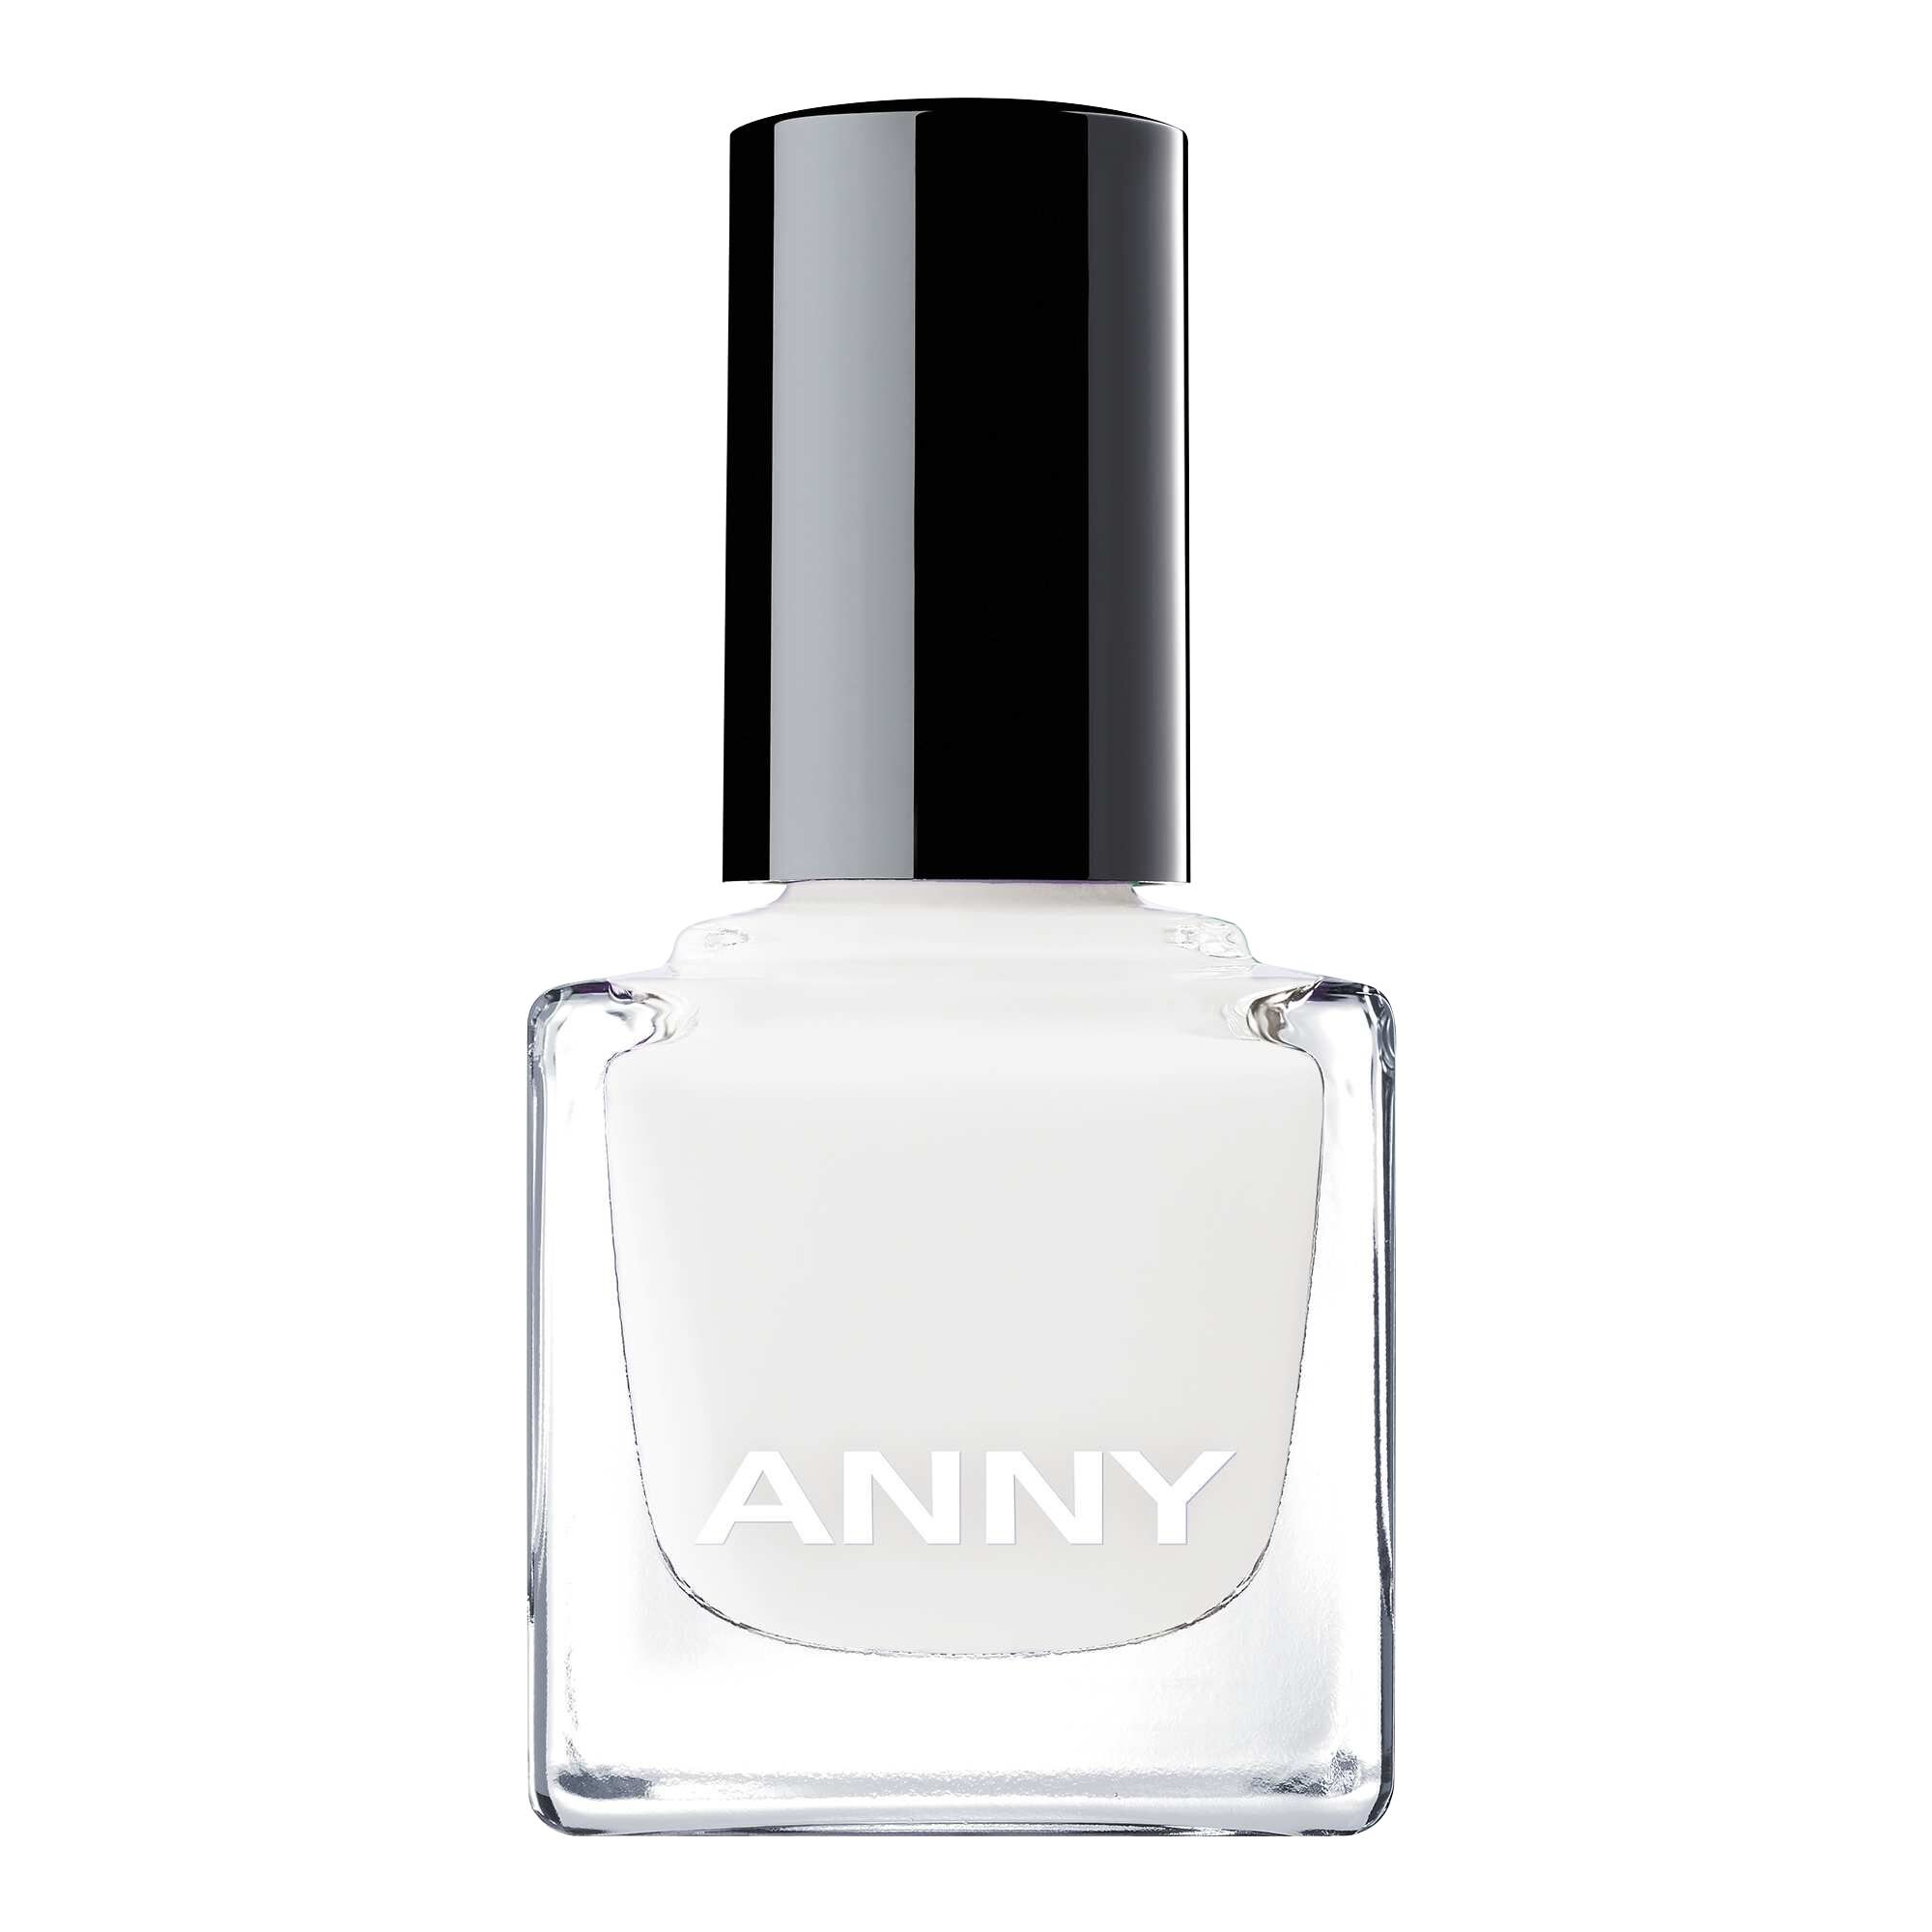 ANNY 324 blogger's favorite [Review + Swatches] – Glamzeit